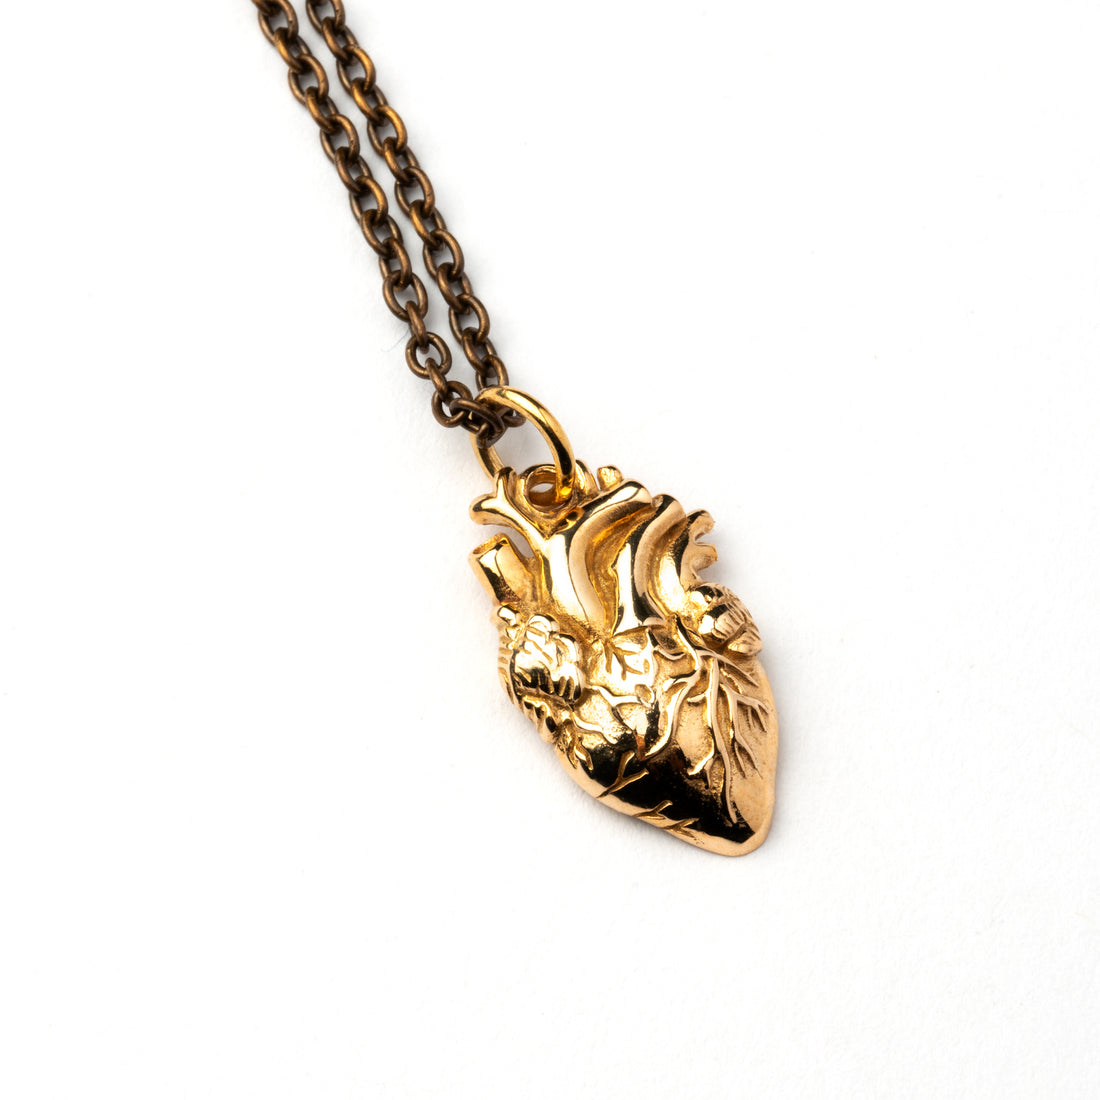 bronze anatomical heart charm necklace on a bronze chain